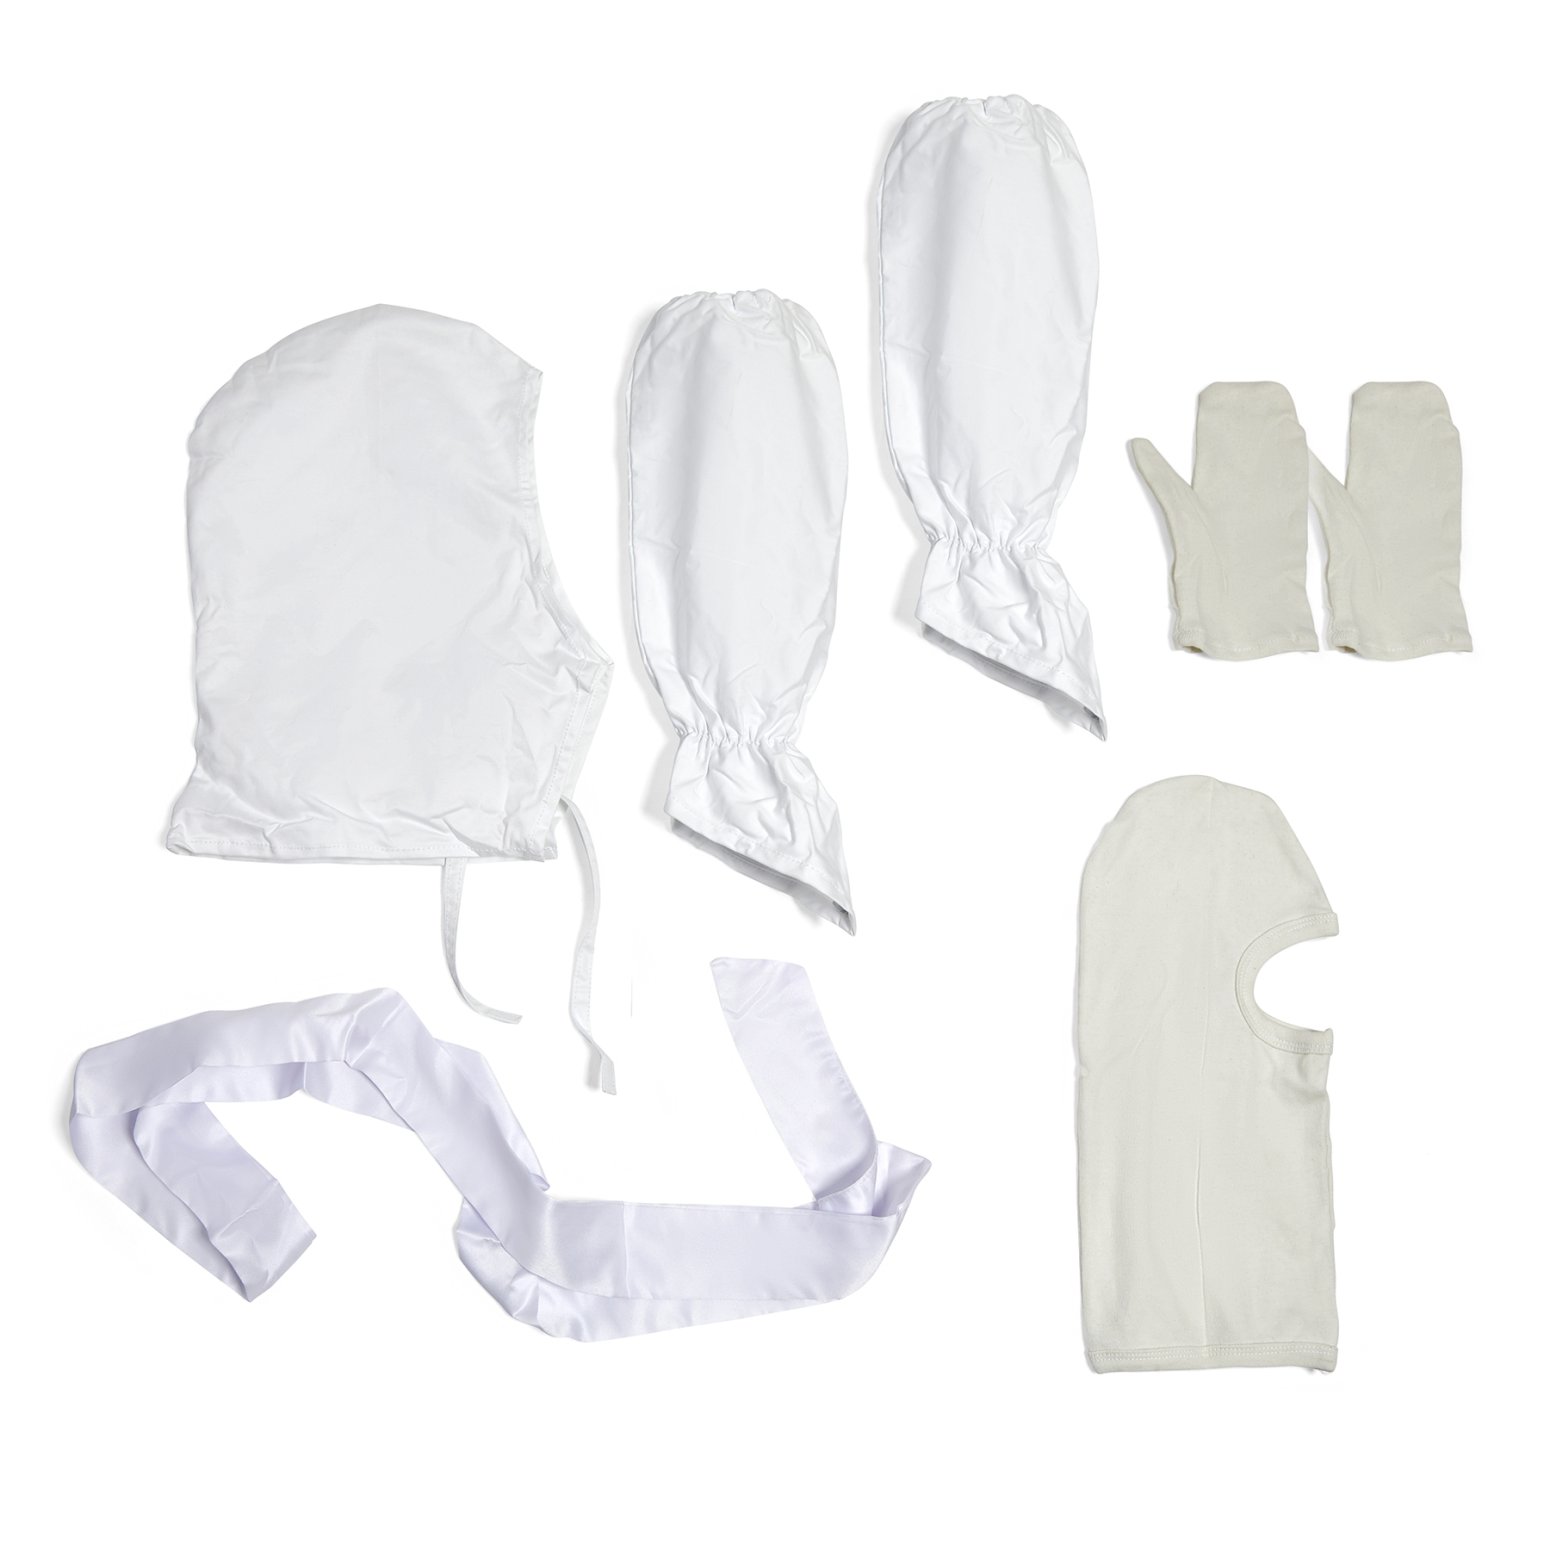 Ninja Gauntlets and Hood Set Pack - White - Click Image to Close